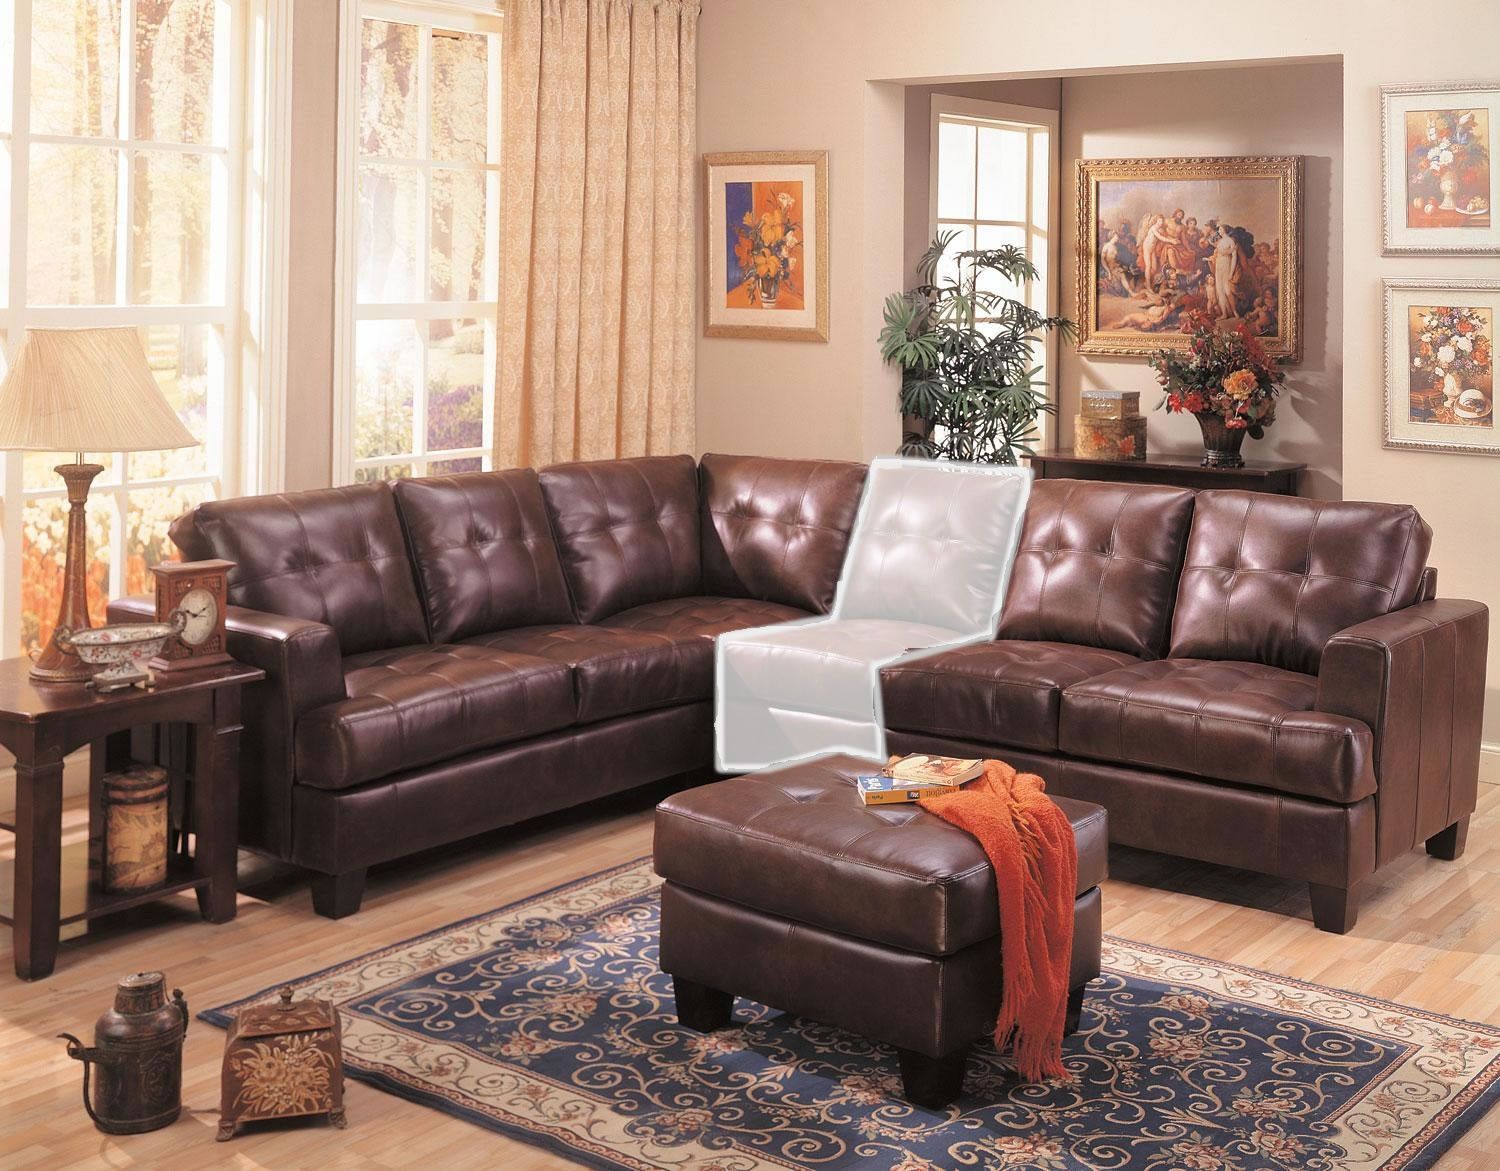 Samuel 3 Piece Brown Leather Sectional Sofa From Coaster Pertaining To 3Pc Faux Leather Sectional Sofas Brown (View 14 of 15)